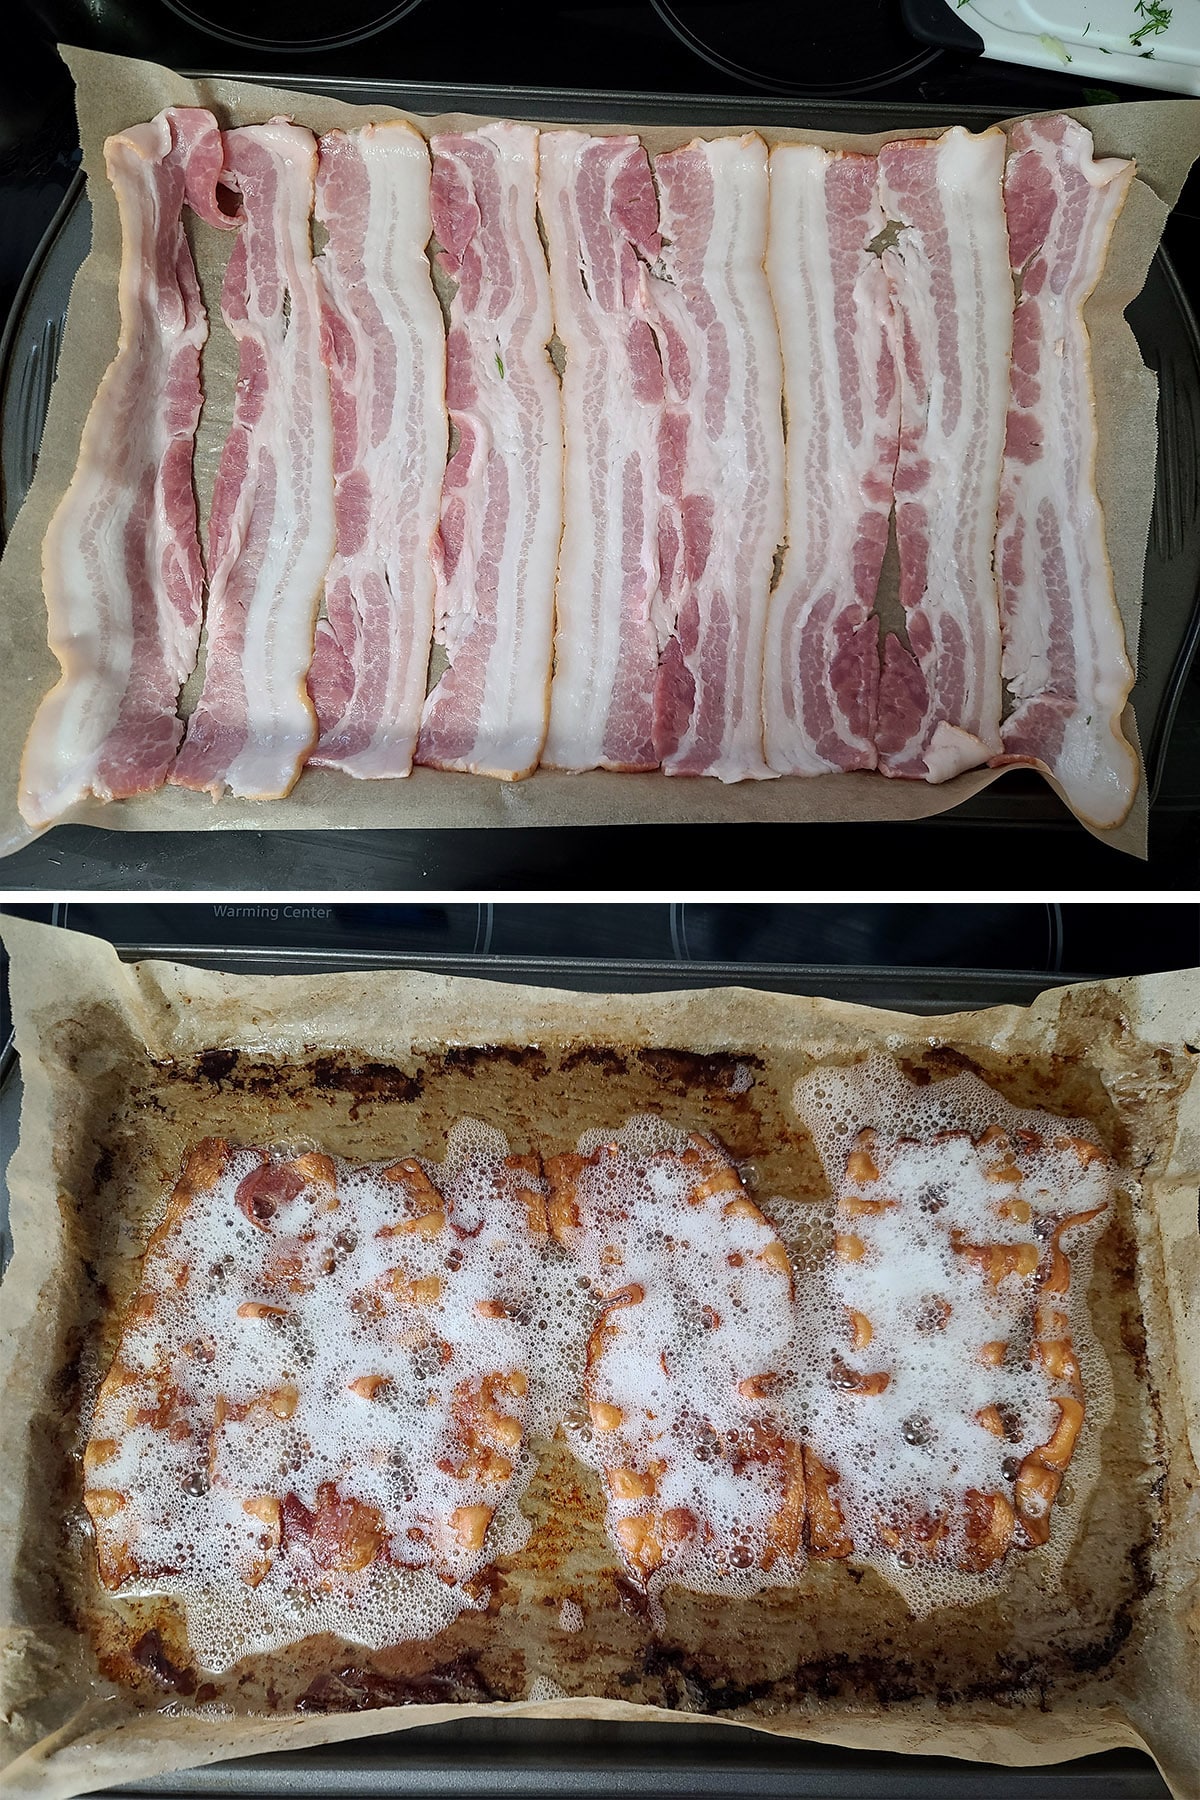 A 2 part image showing raw bacon lined up on a parchment lined baking sheet, then the same bacon after being cooked.